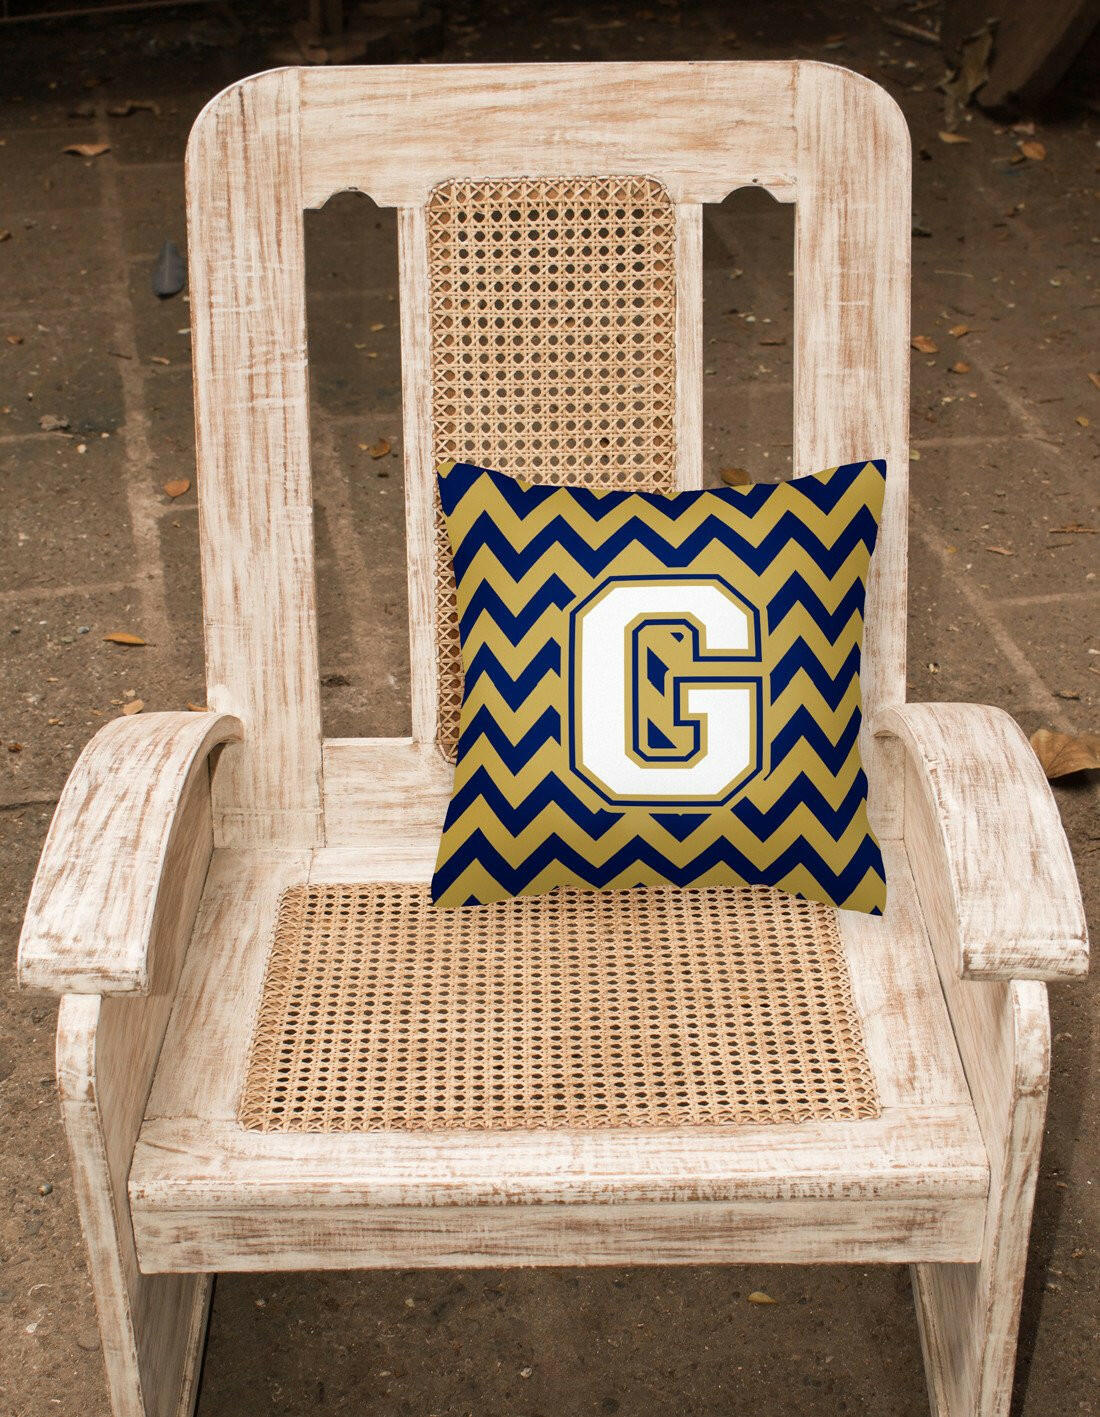 Letter G Chevron Navy Blue and Gold Fabric Decorative Pillow CJ1057-GPW1414 by Caroline's Treasures